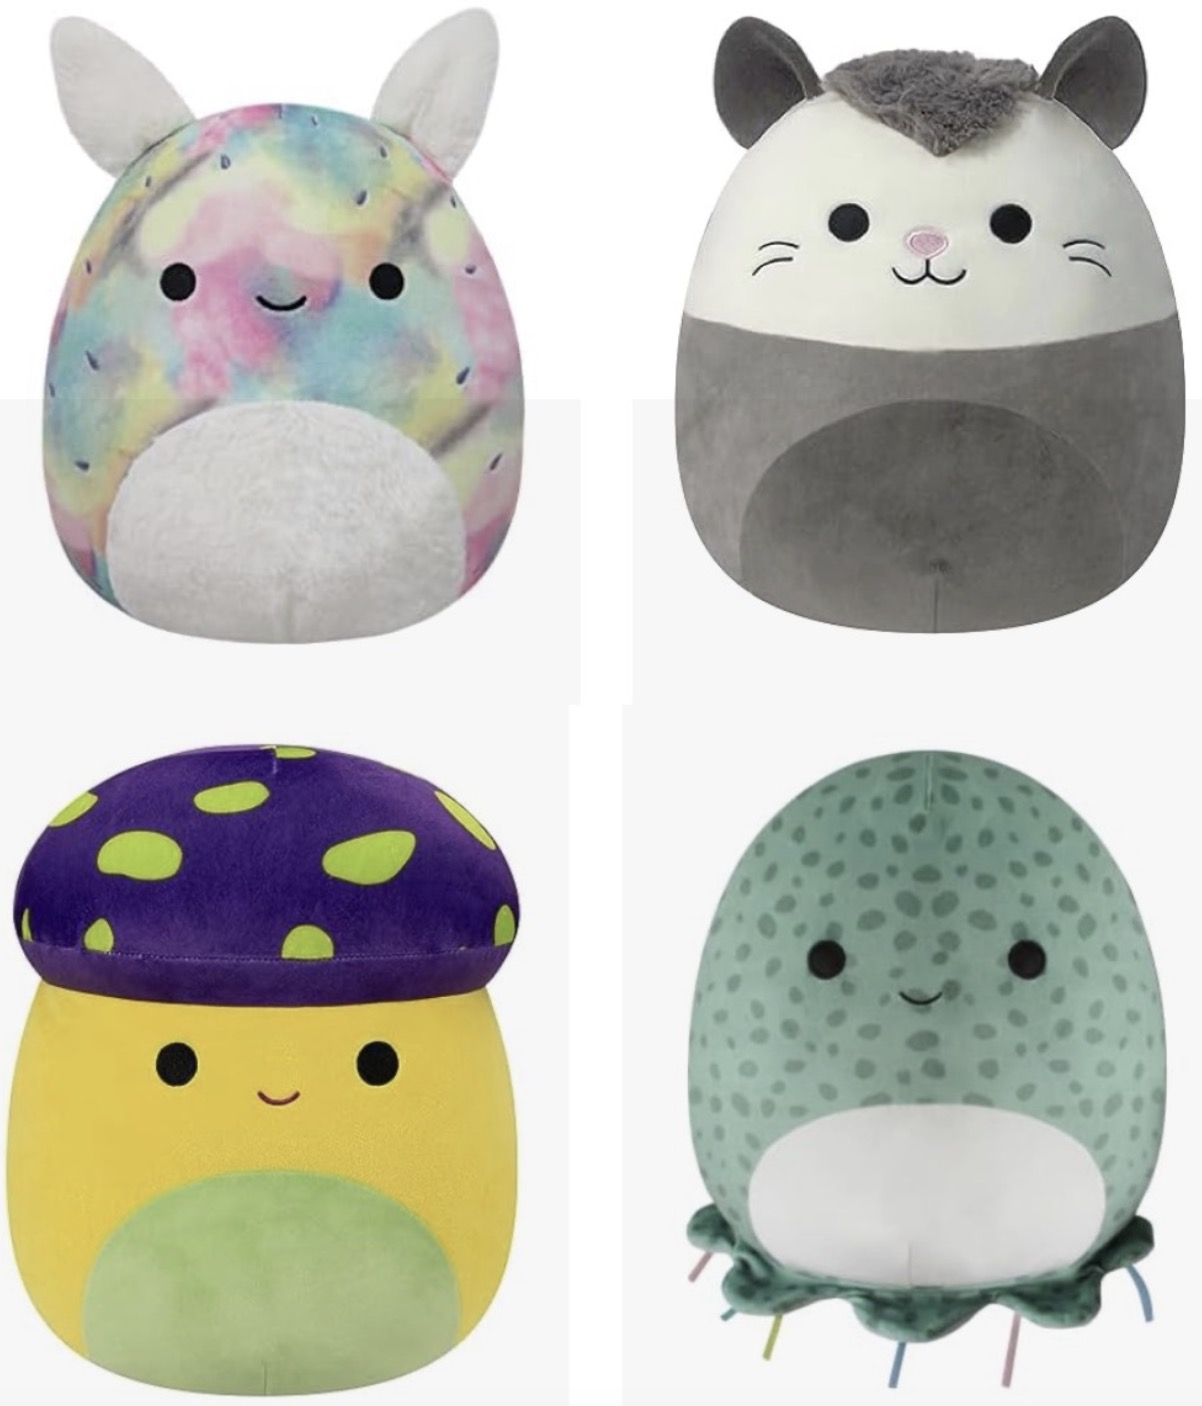 Enormous Sale on Squishmallows!